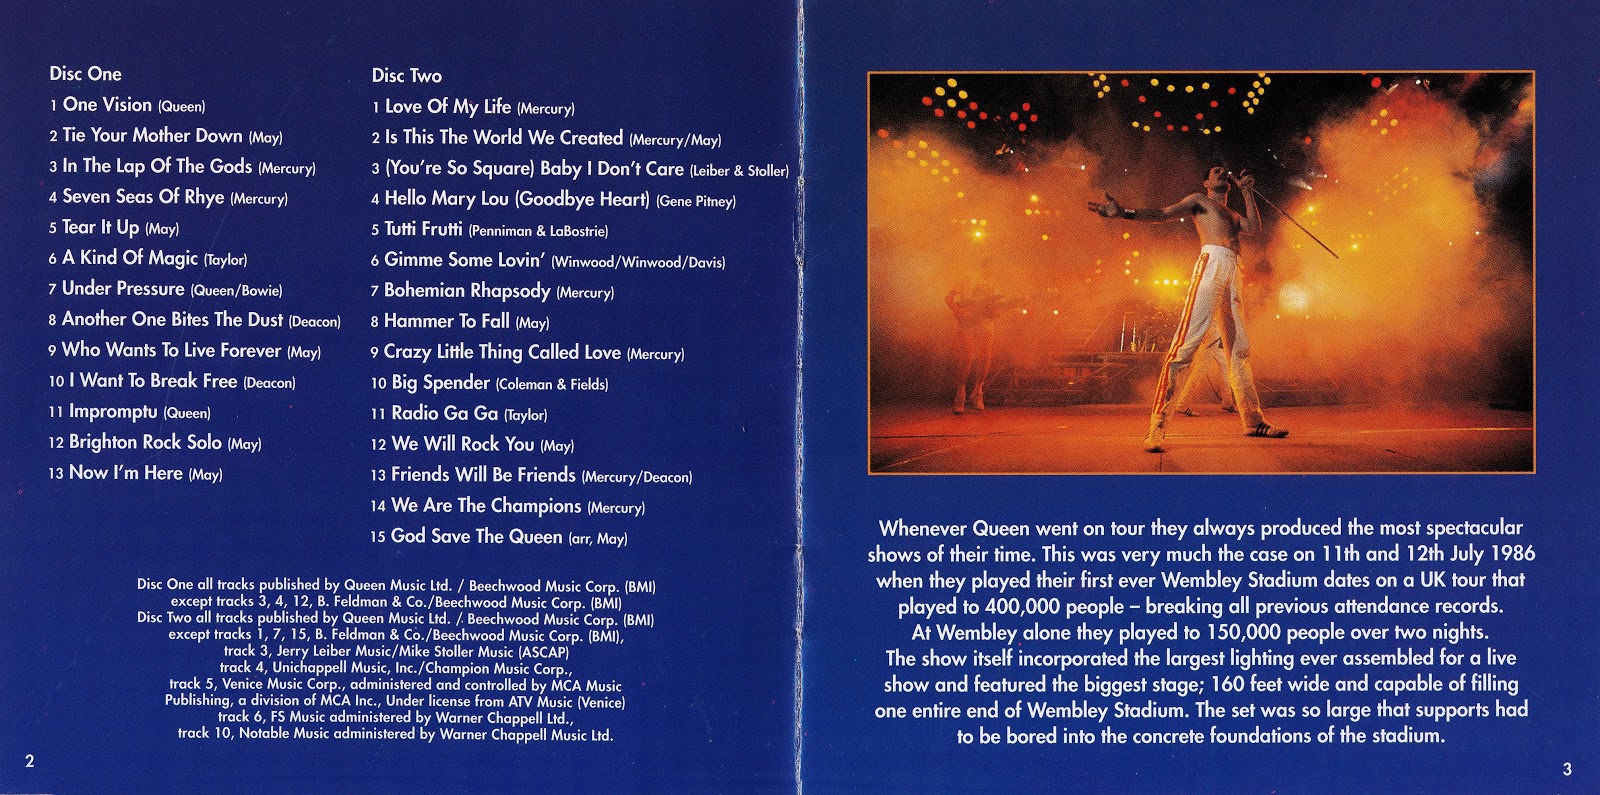 Queen 1992 Live at Wembley 86. Who wants to Live Forever Queen OST. The queen lives in a big